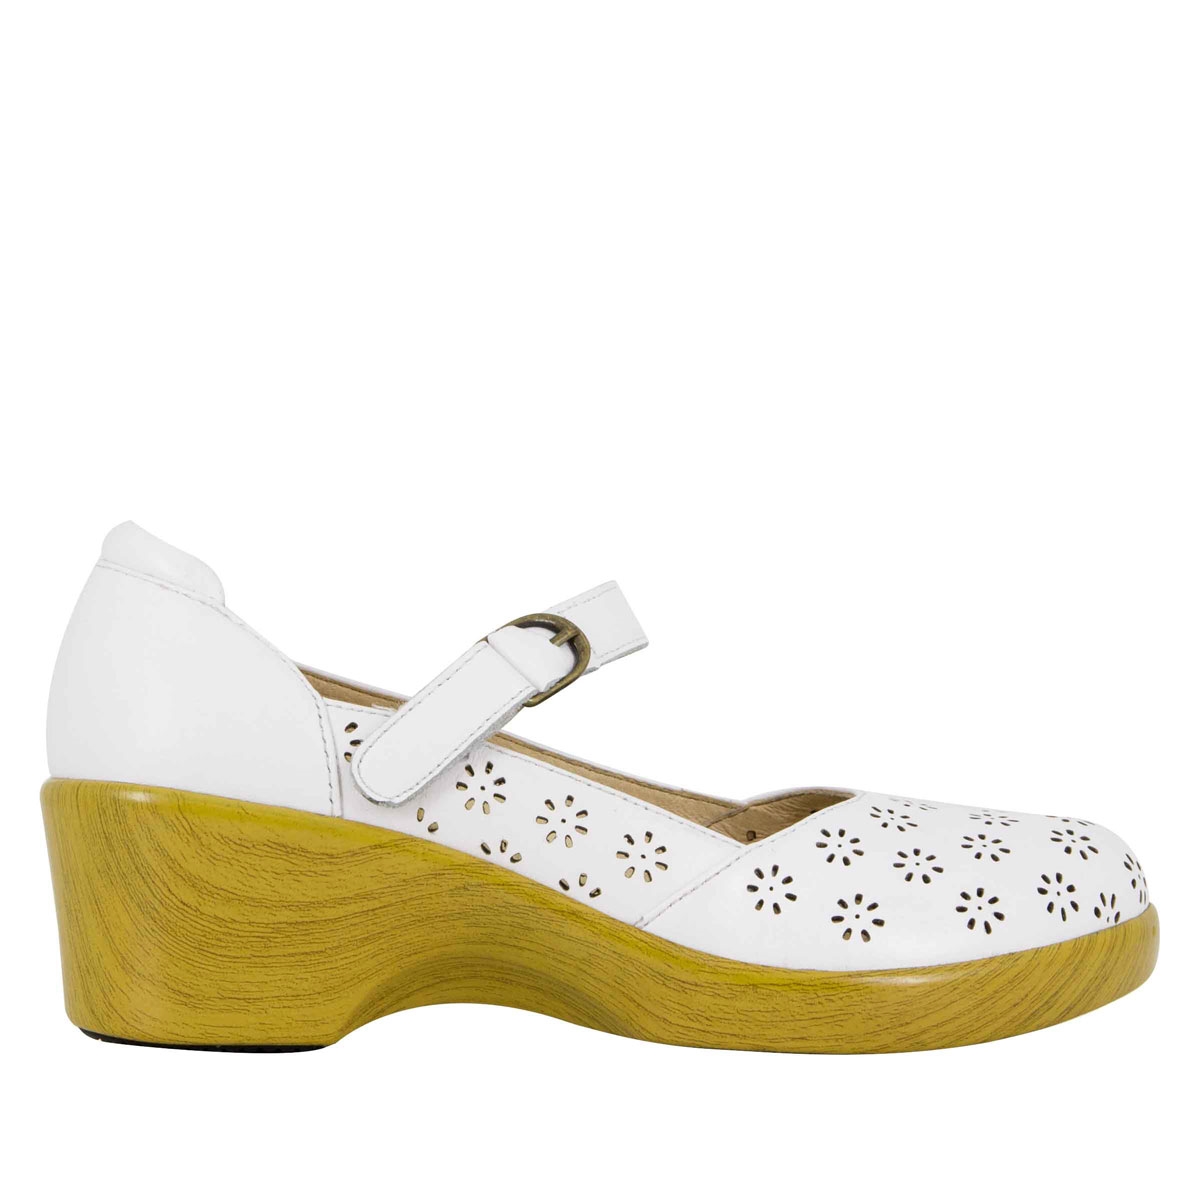 Alegria Shoes - Rene White Butter